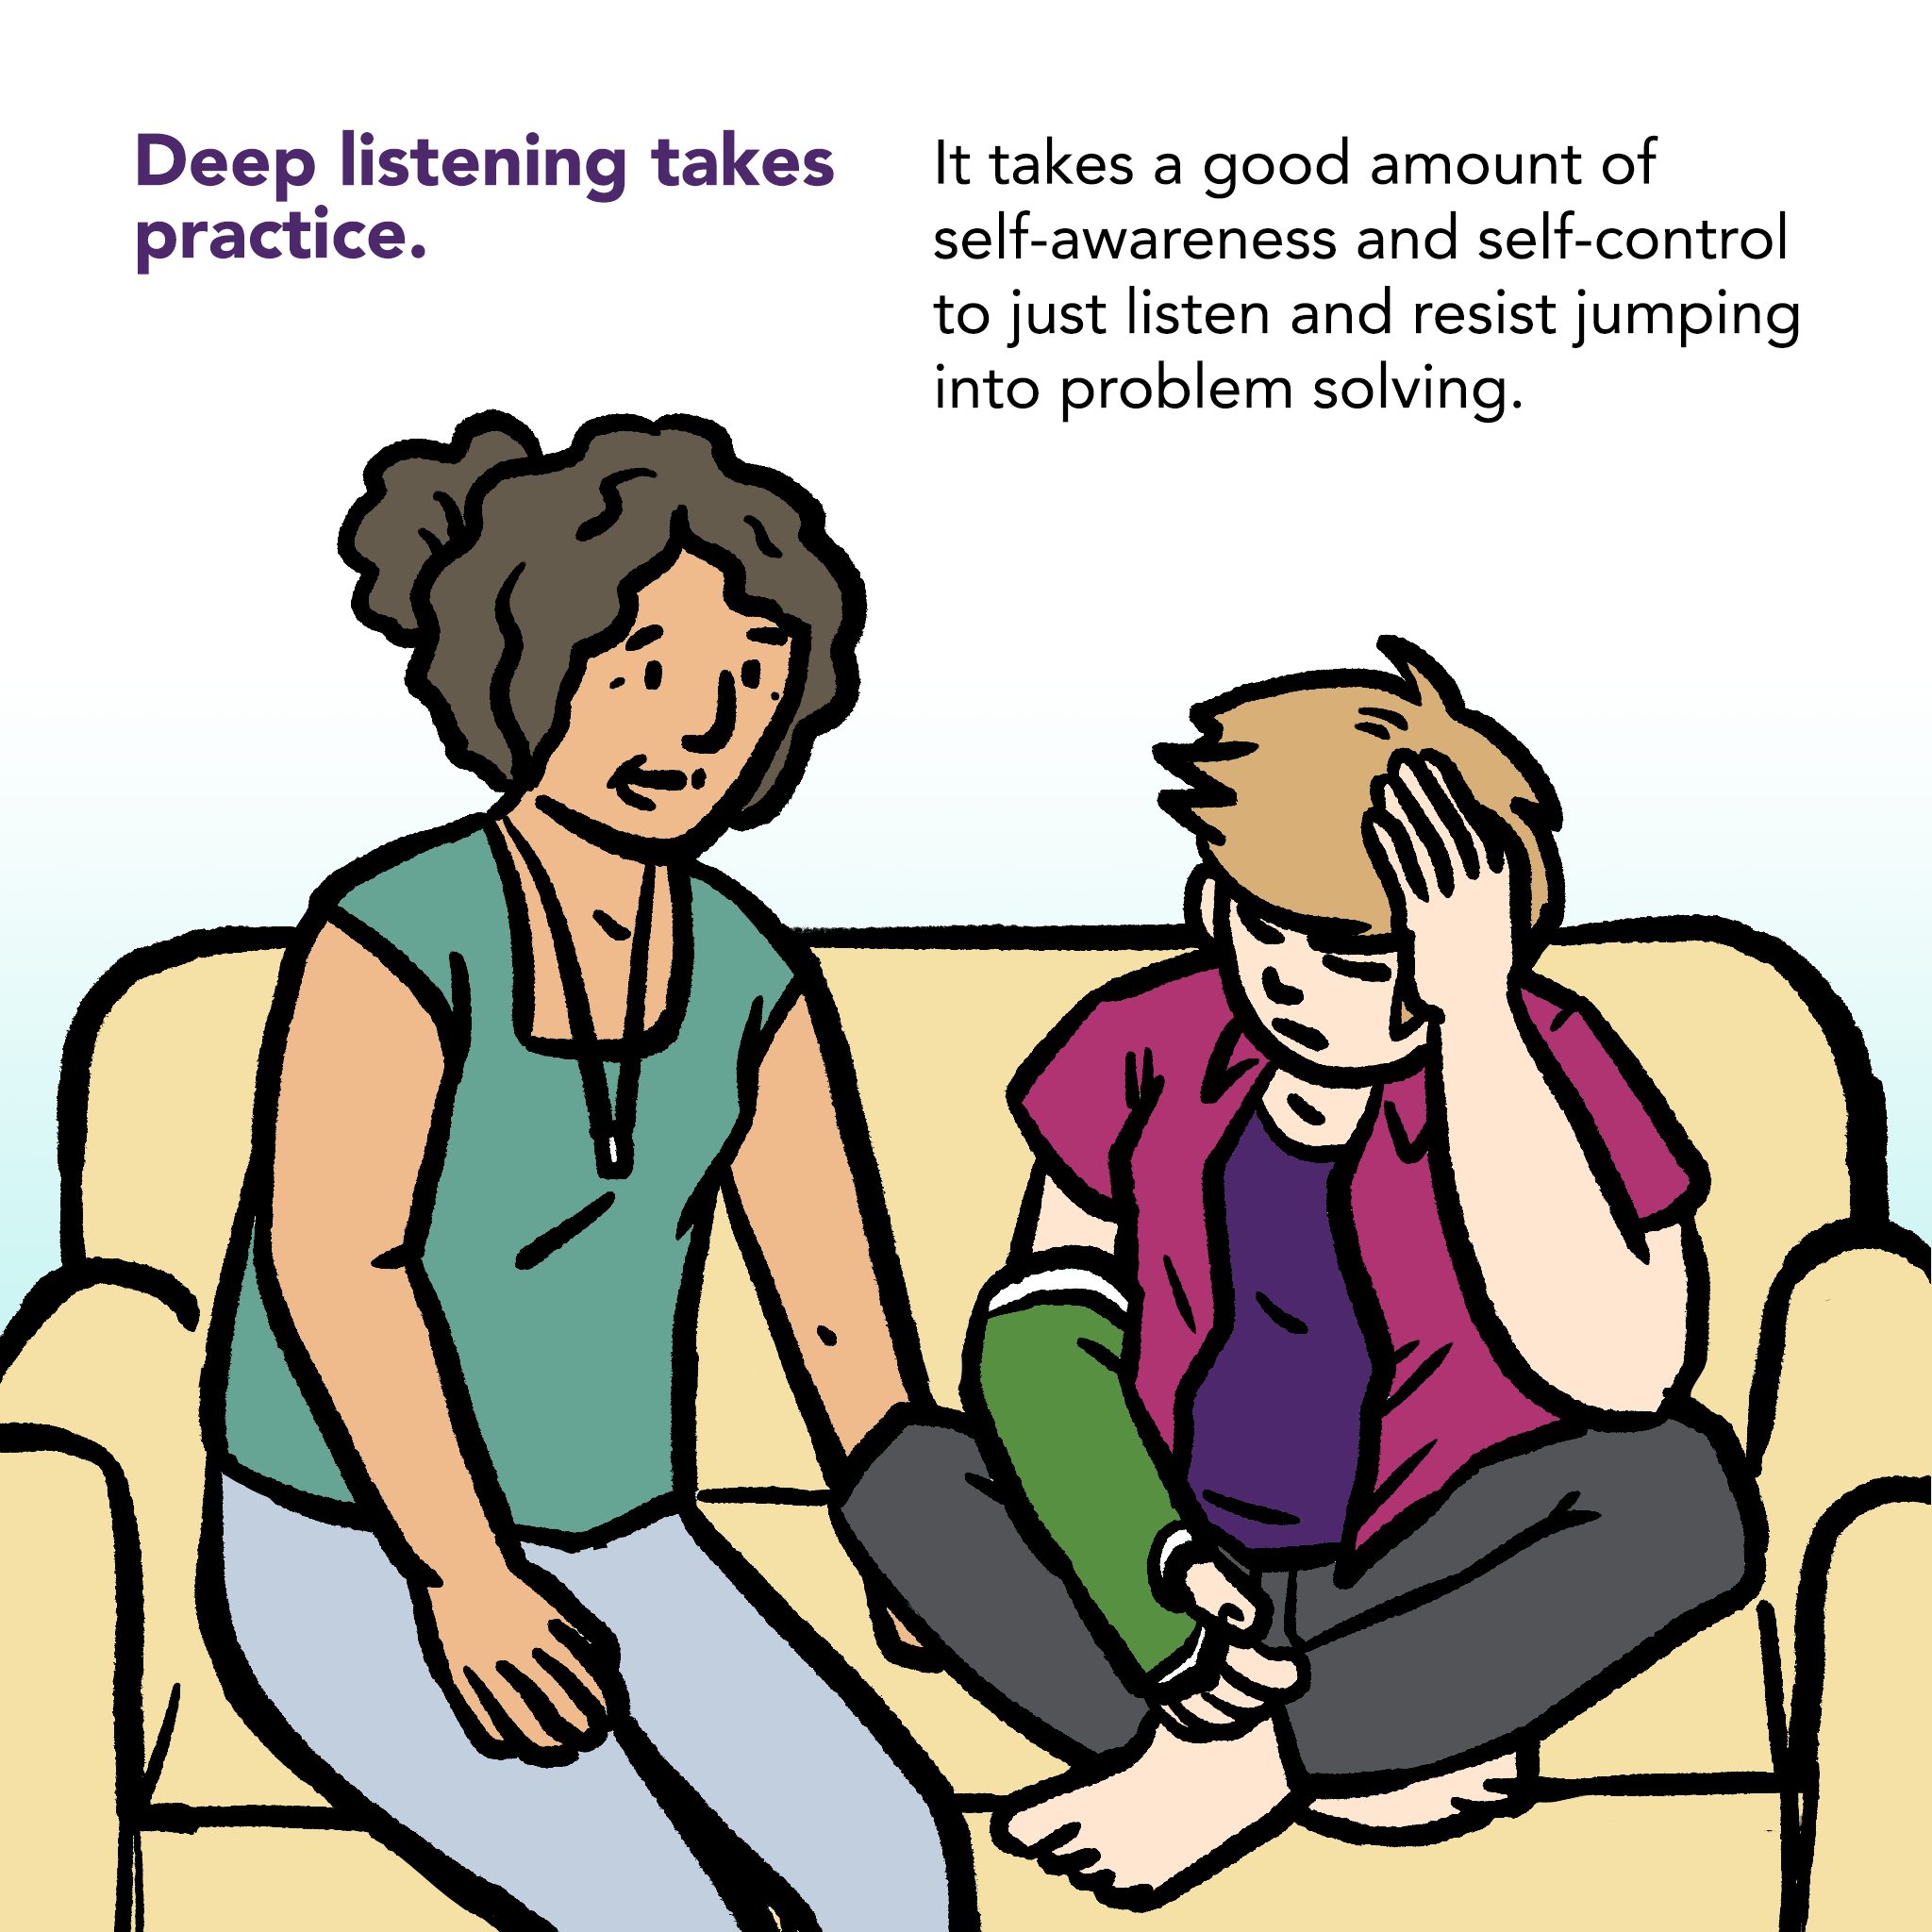 Illustration of an adult and a youth sitting on a couch. Adult is talking and youth is scowling and looking down. Caption says "Deep listening takes practice. It takes a good amount of self-awareness and self-control to just listen and resist jumping into problem solving."